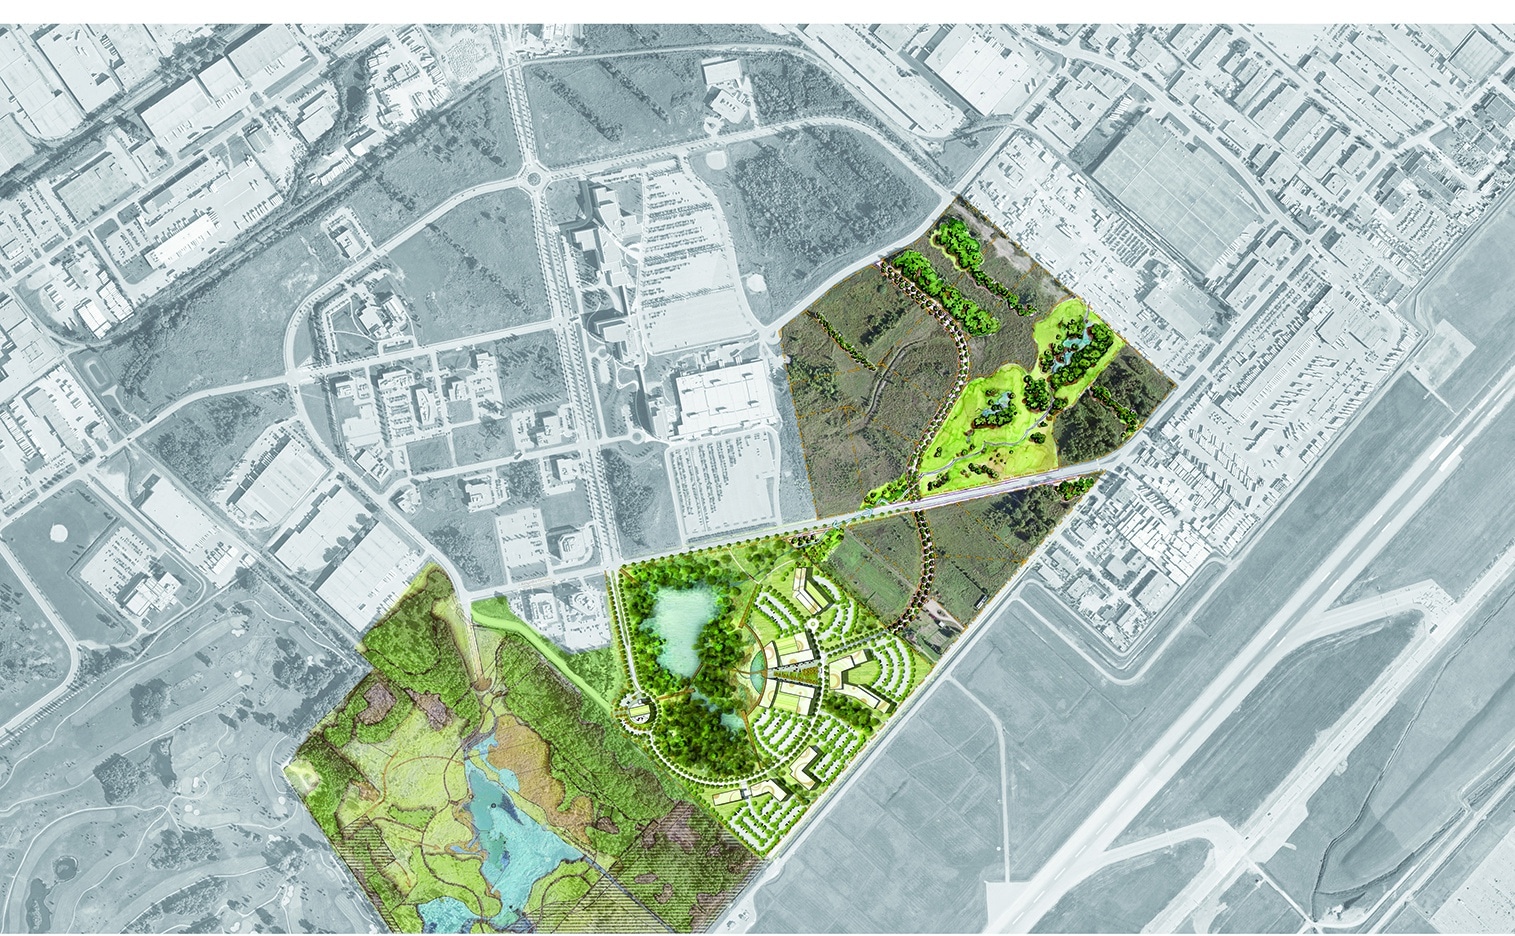 eco-campus_hubertreeves_plan_integration_low